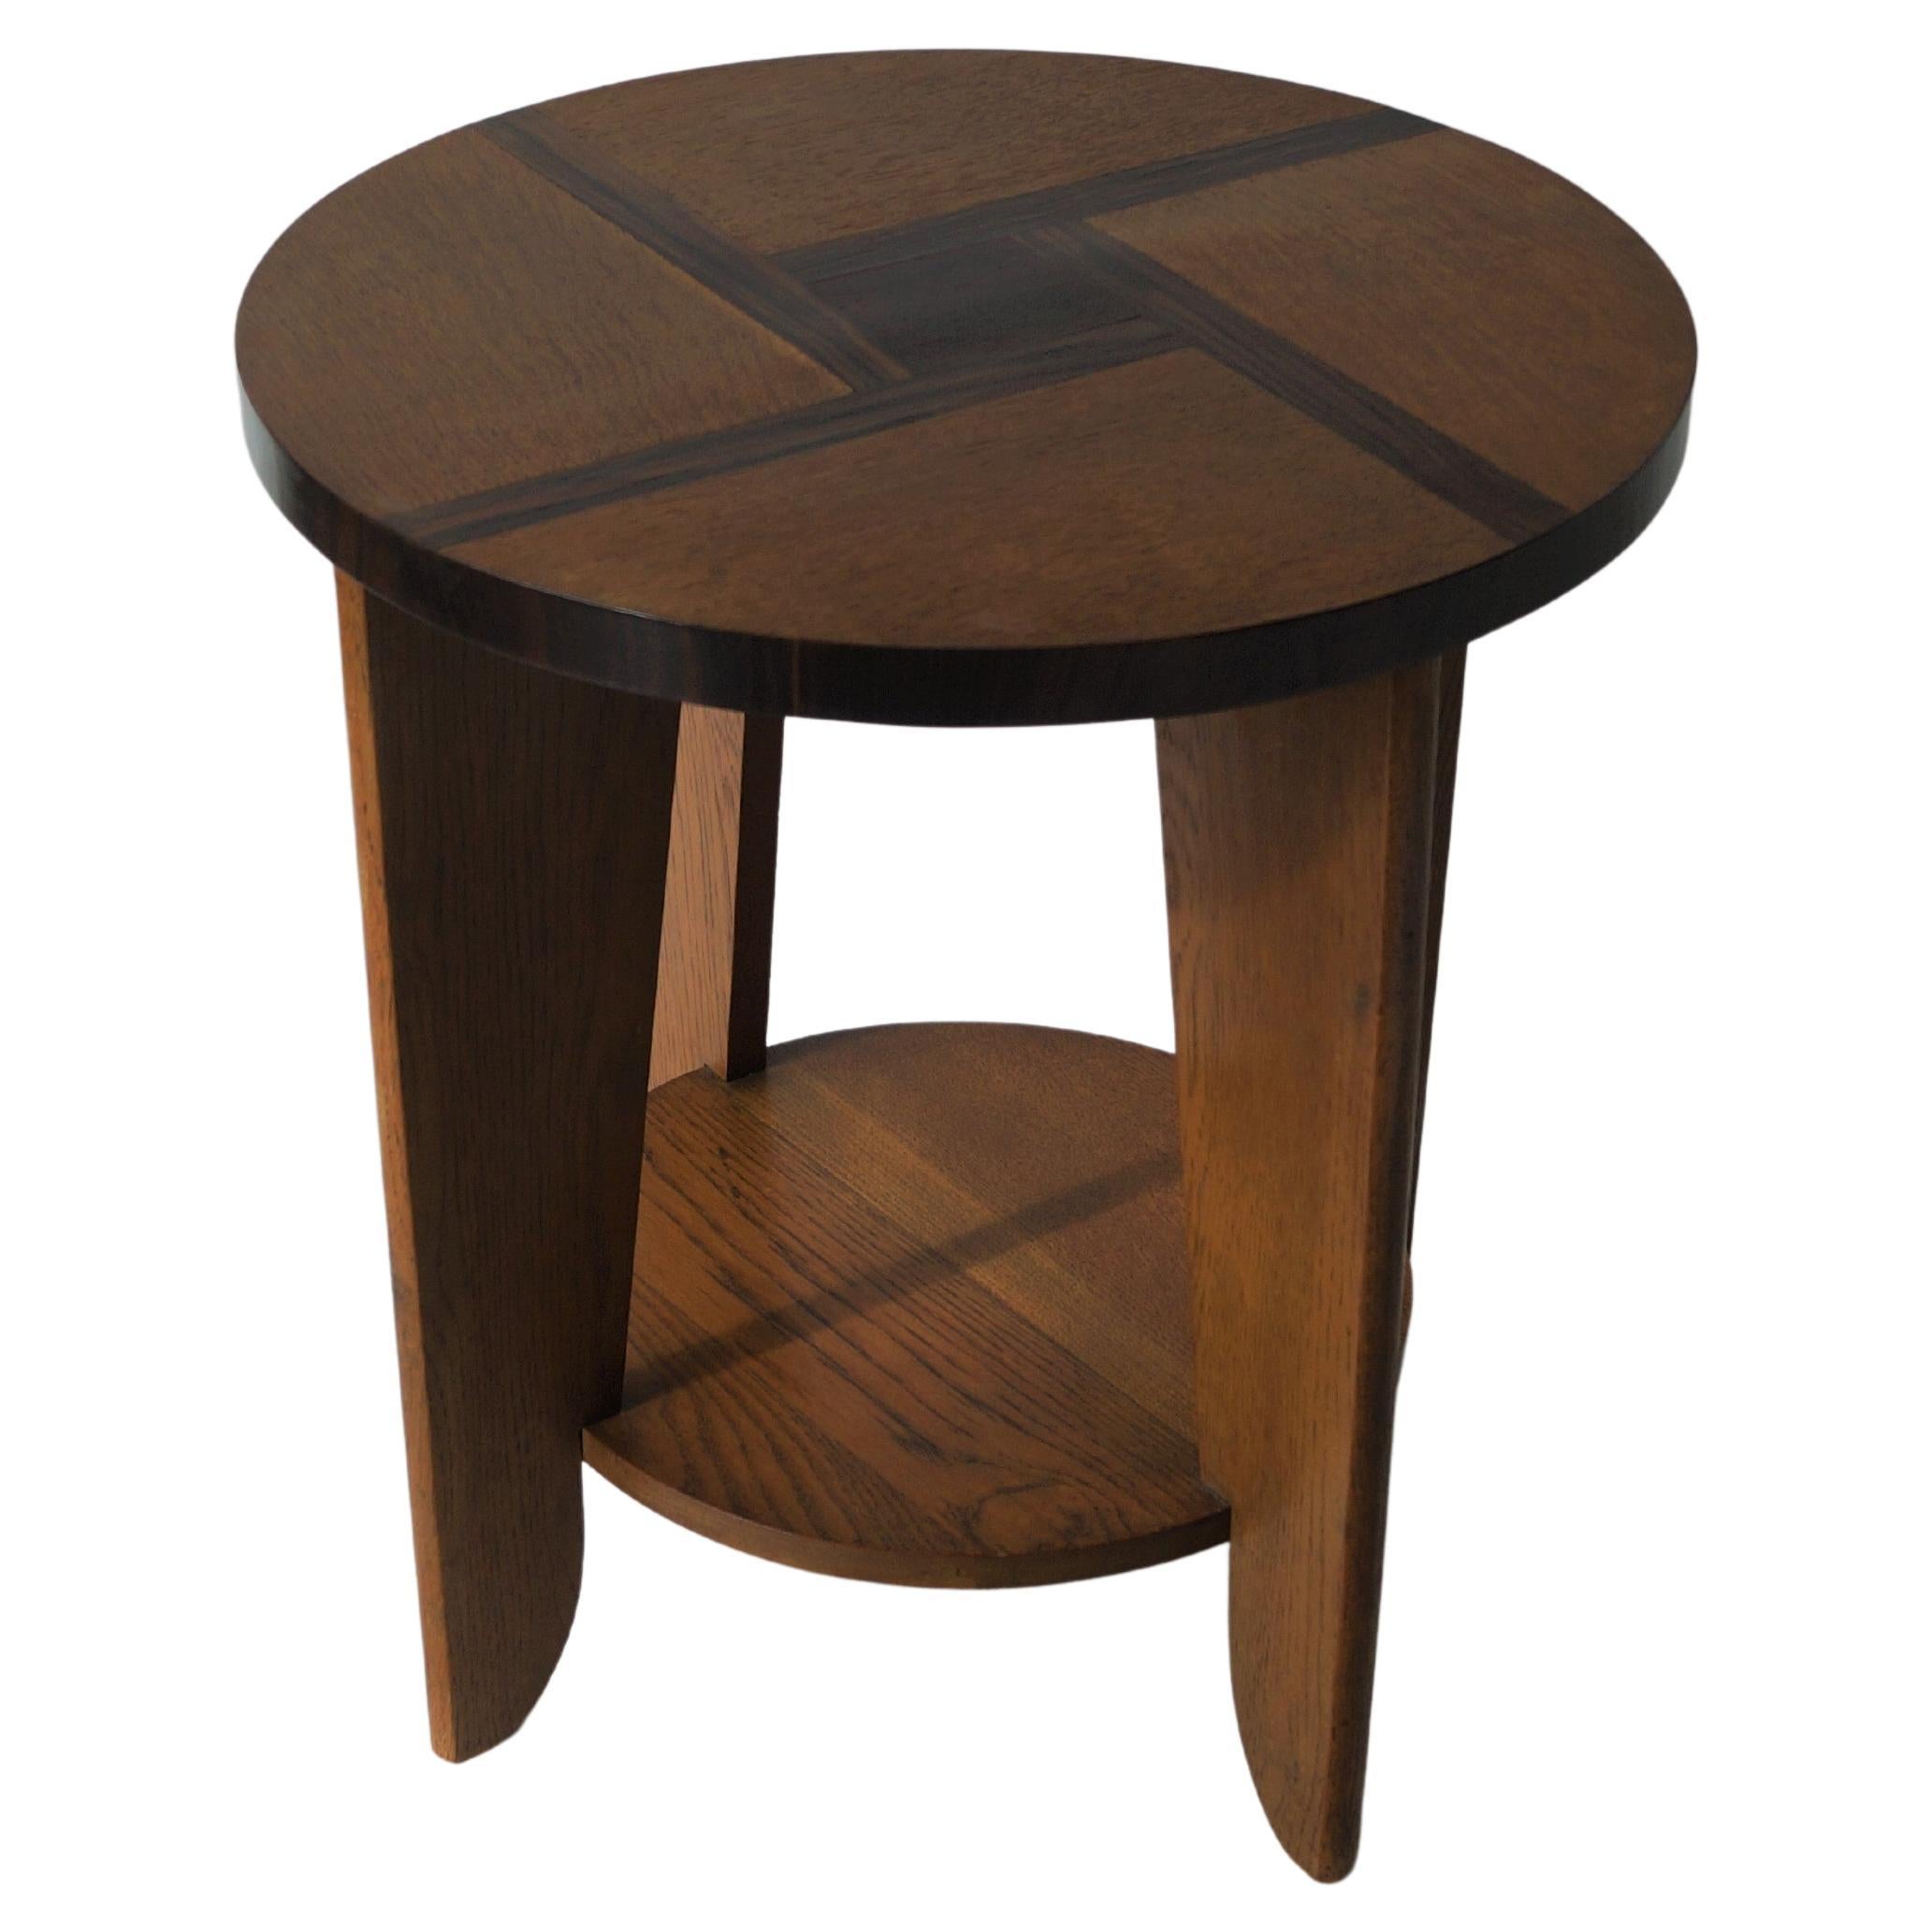 Modernist/Haagse School solid oak side table from Art Deco era, Haagse School (The Hague School), marked underneath with dating febr. 1935. Eye catching and rather large piece with a geometric pattern in macassar ebony and mahogany square on the